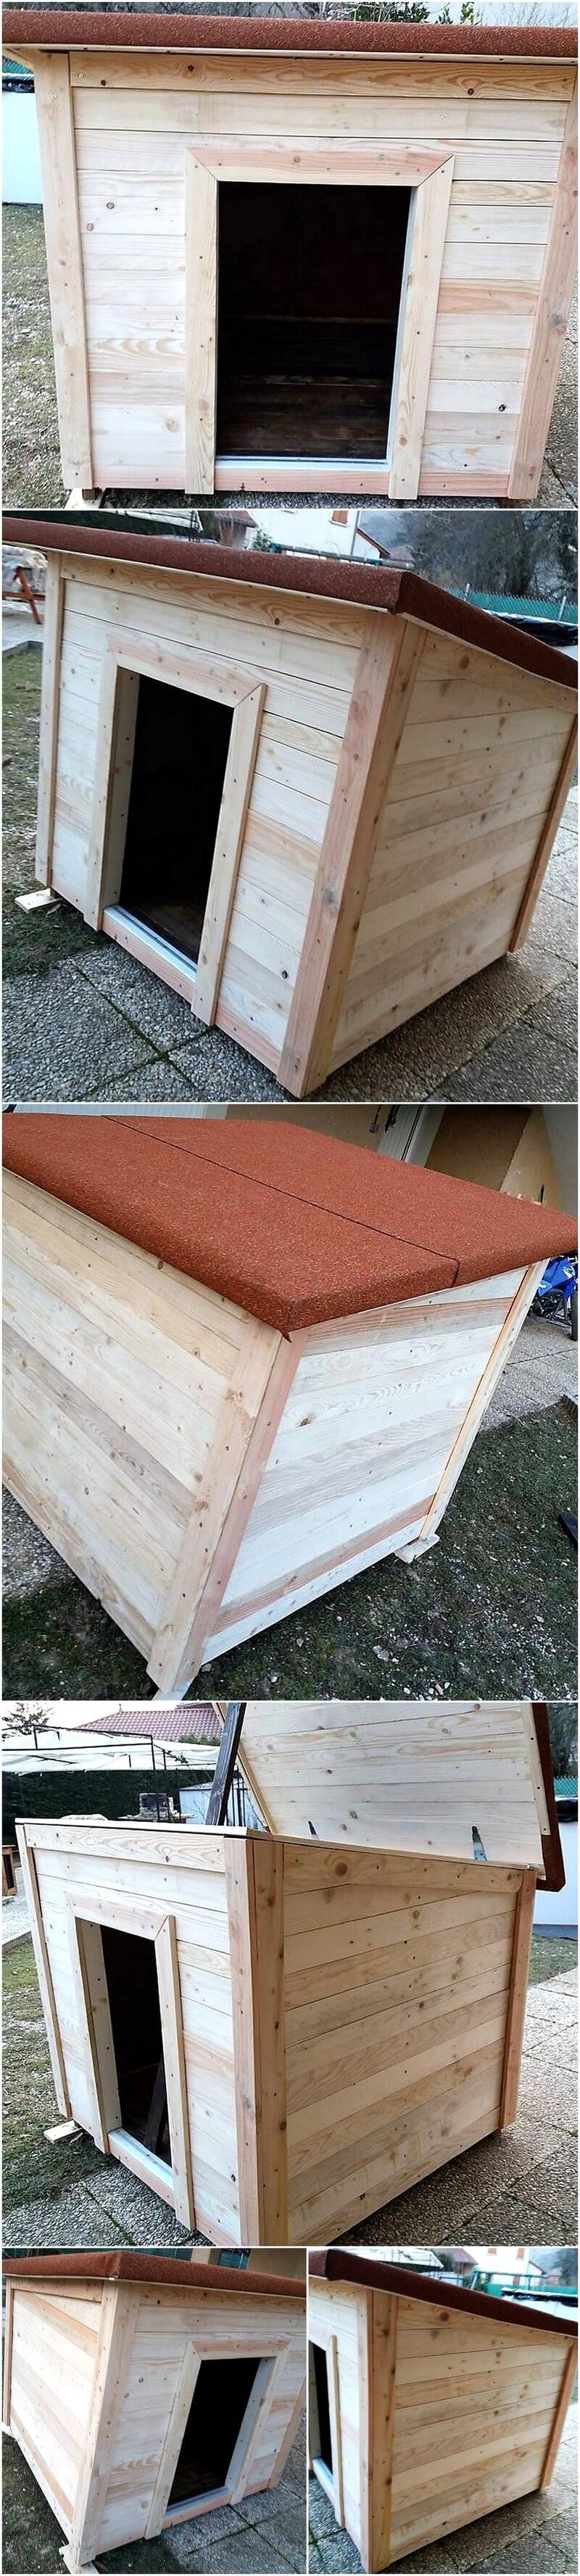 dog house made with pallets